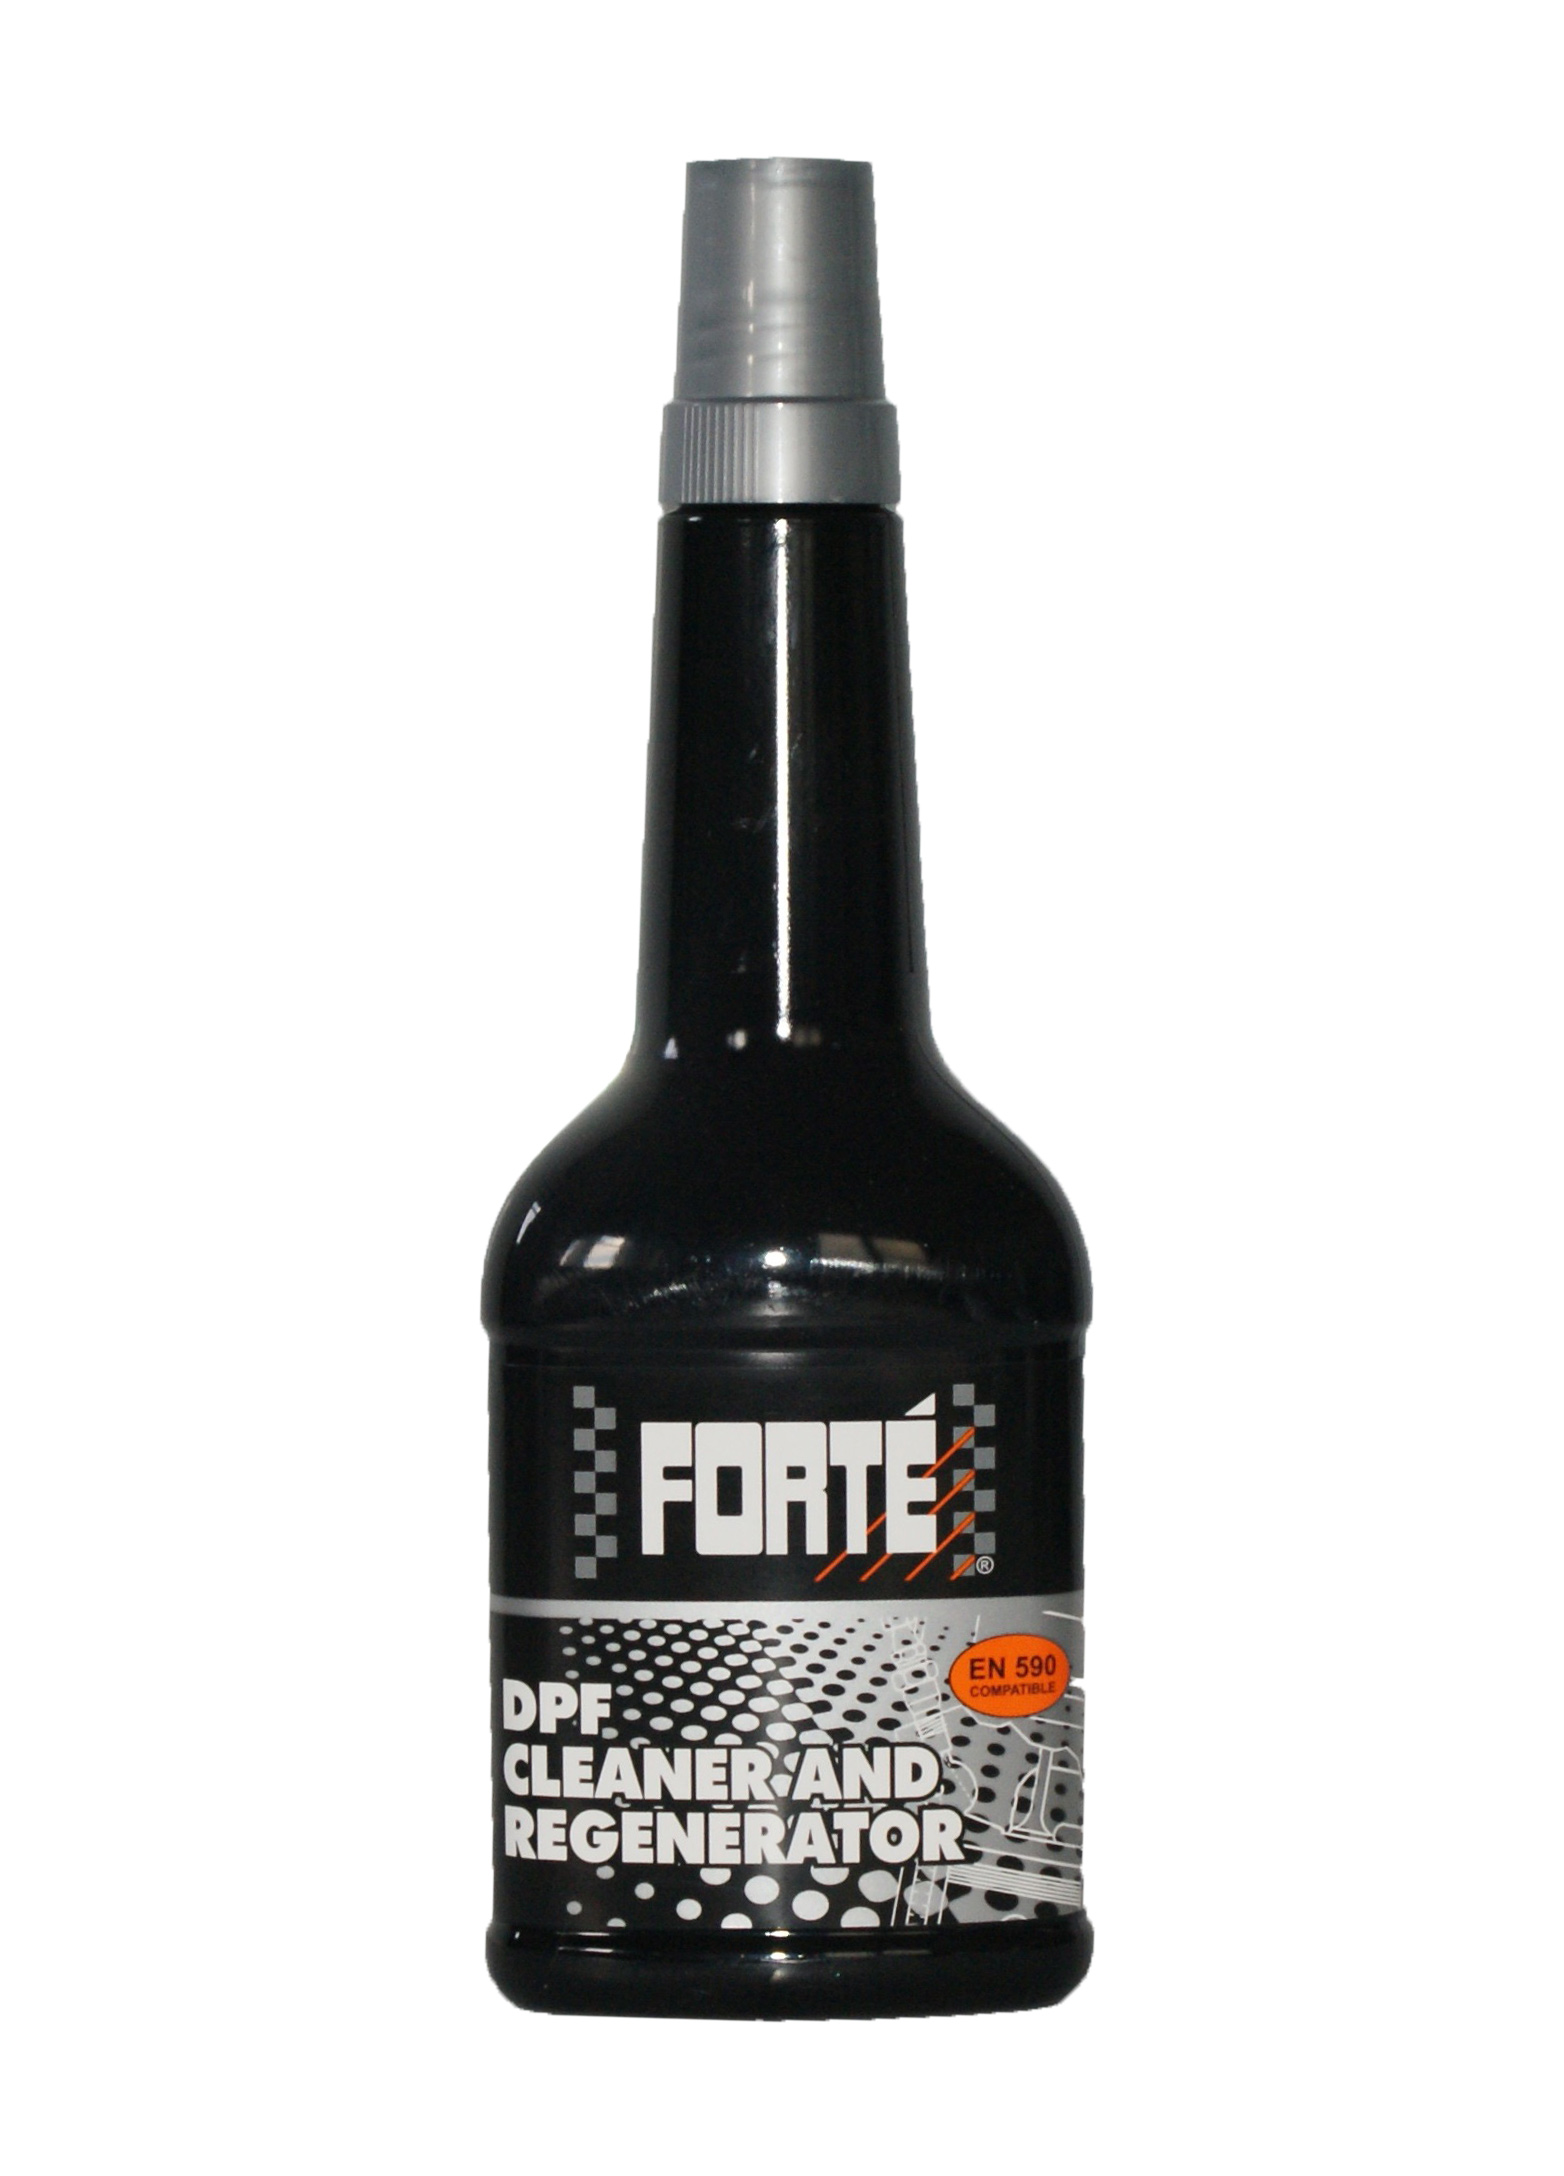 15% off Forte DPF Cleaner and Regenerator Forte DPF Cleaner and Regenerator